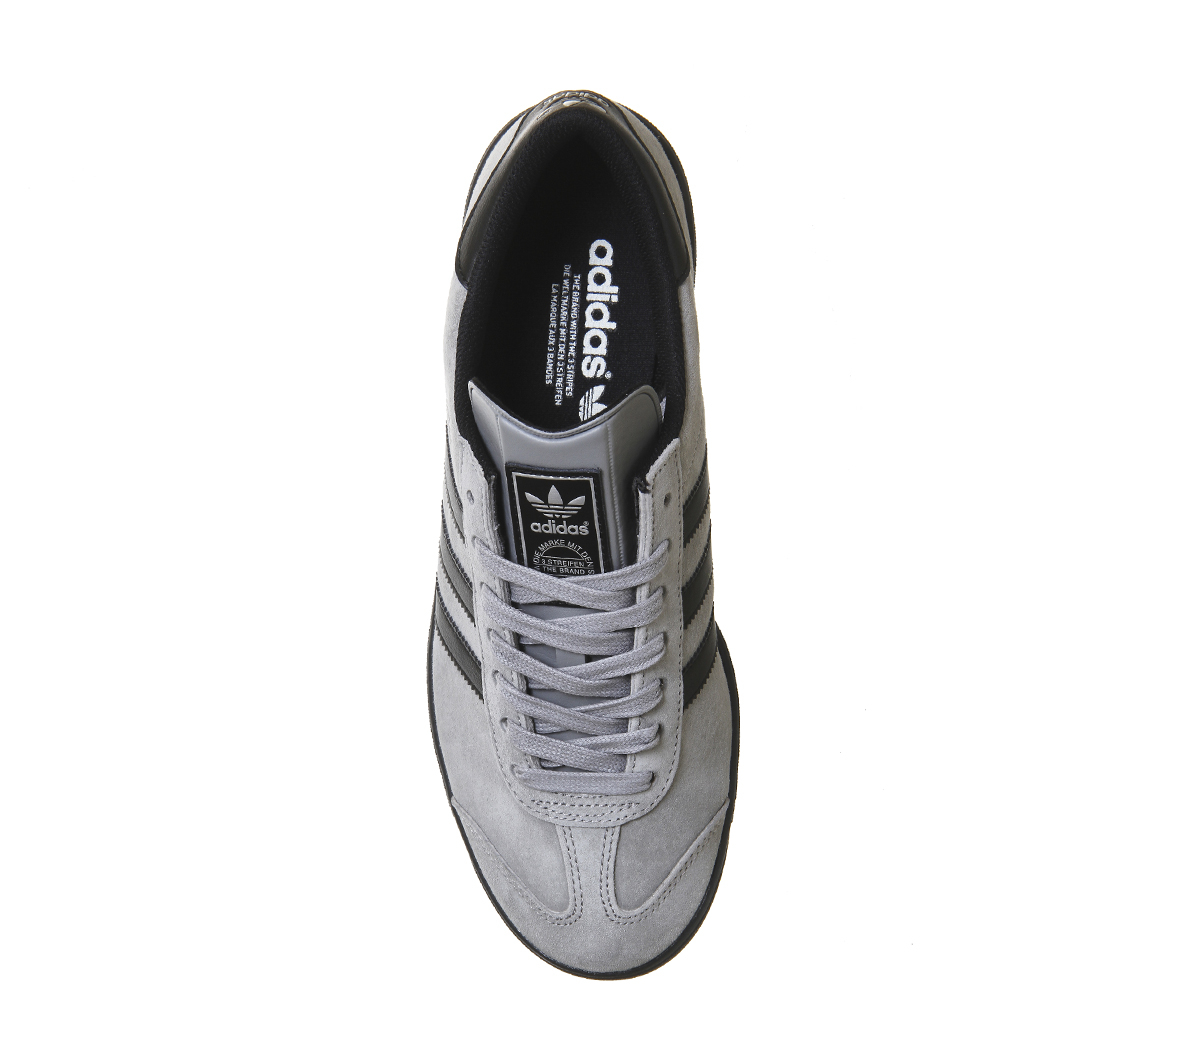 adidas Originals Hamburg Suede and Leather Low-Top Sneakers in Grey ...